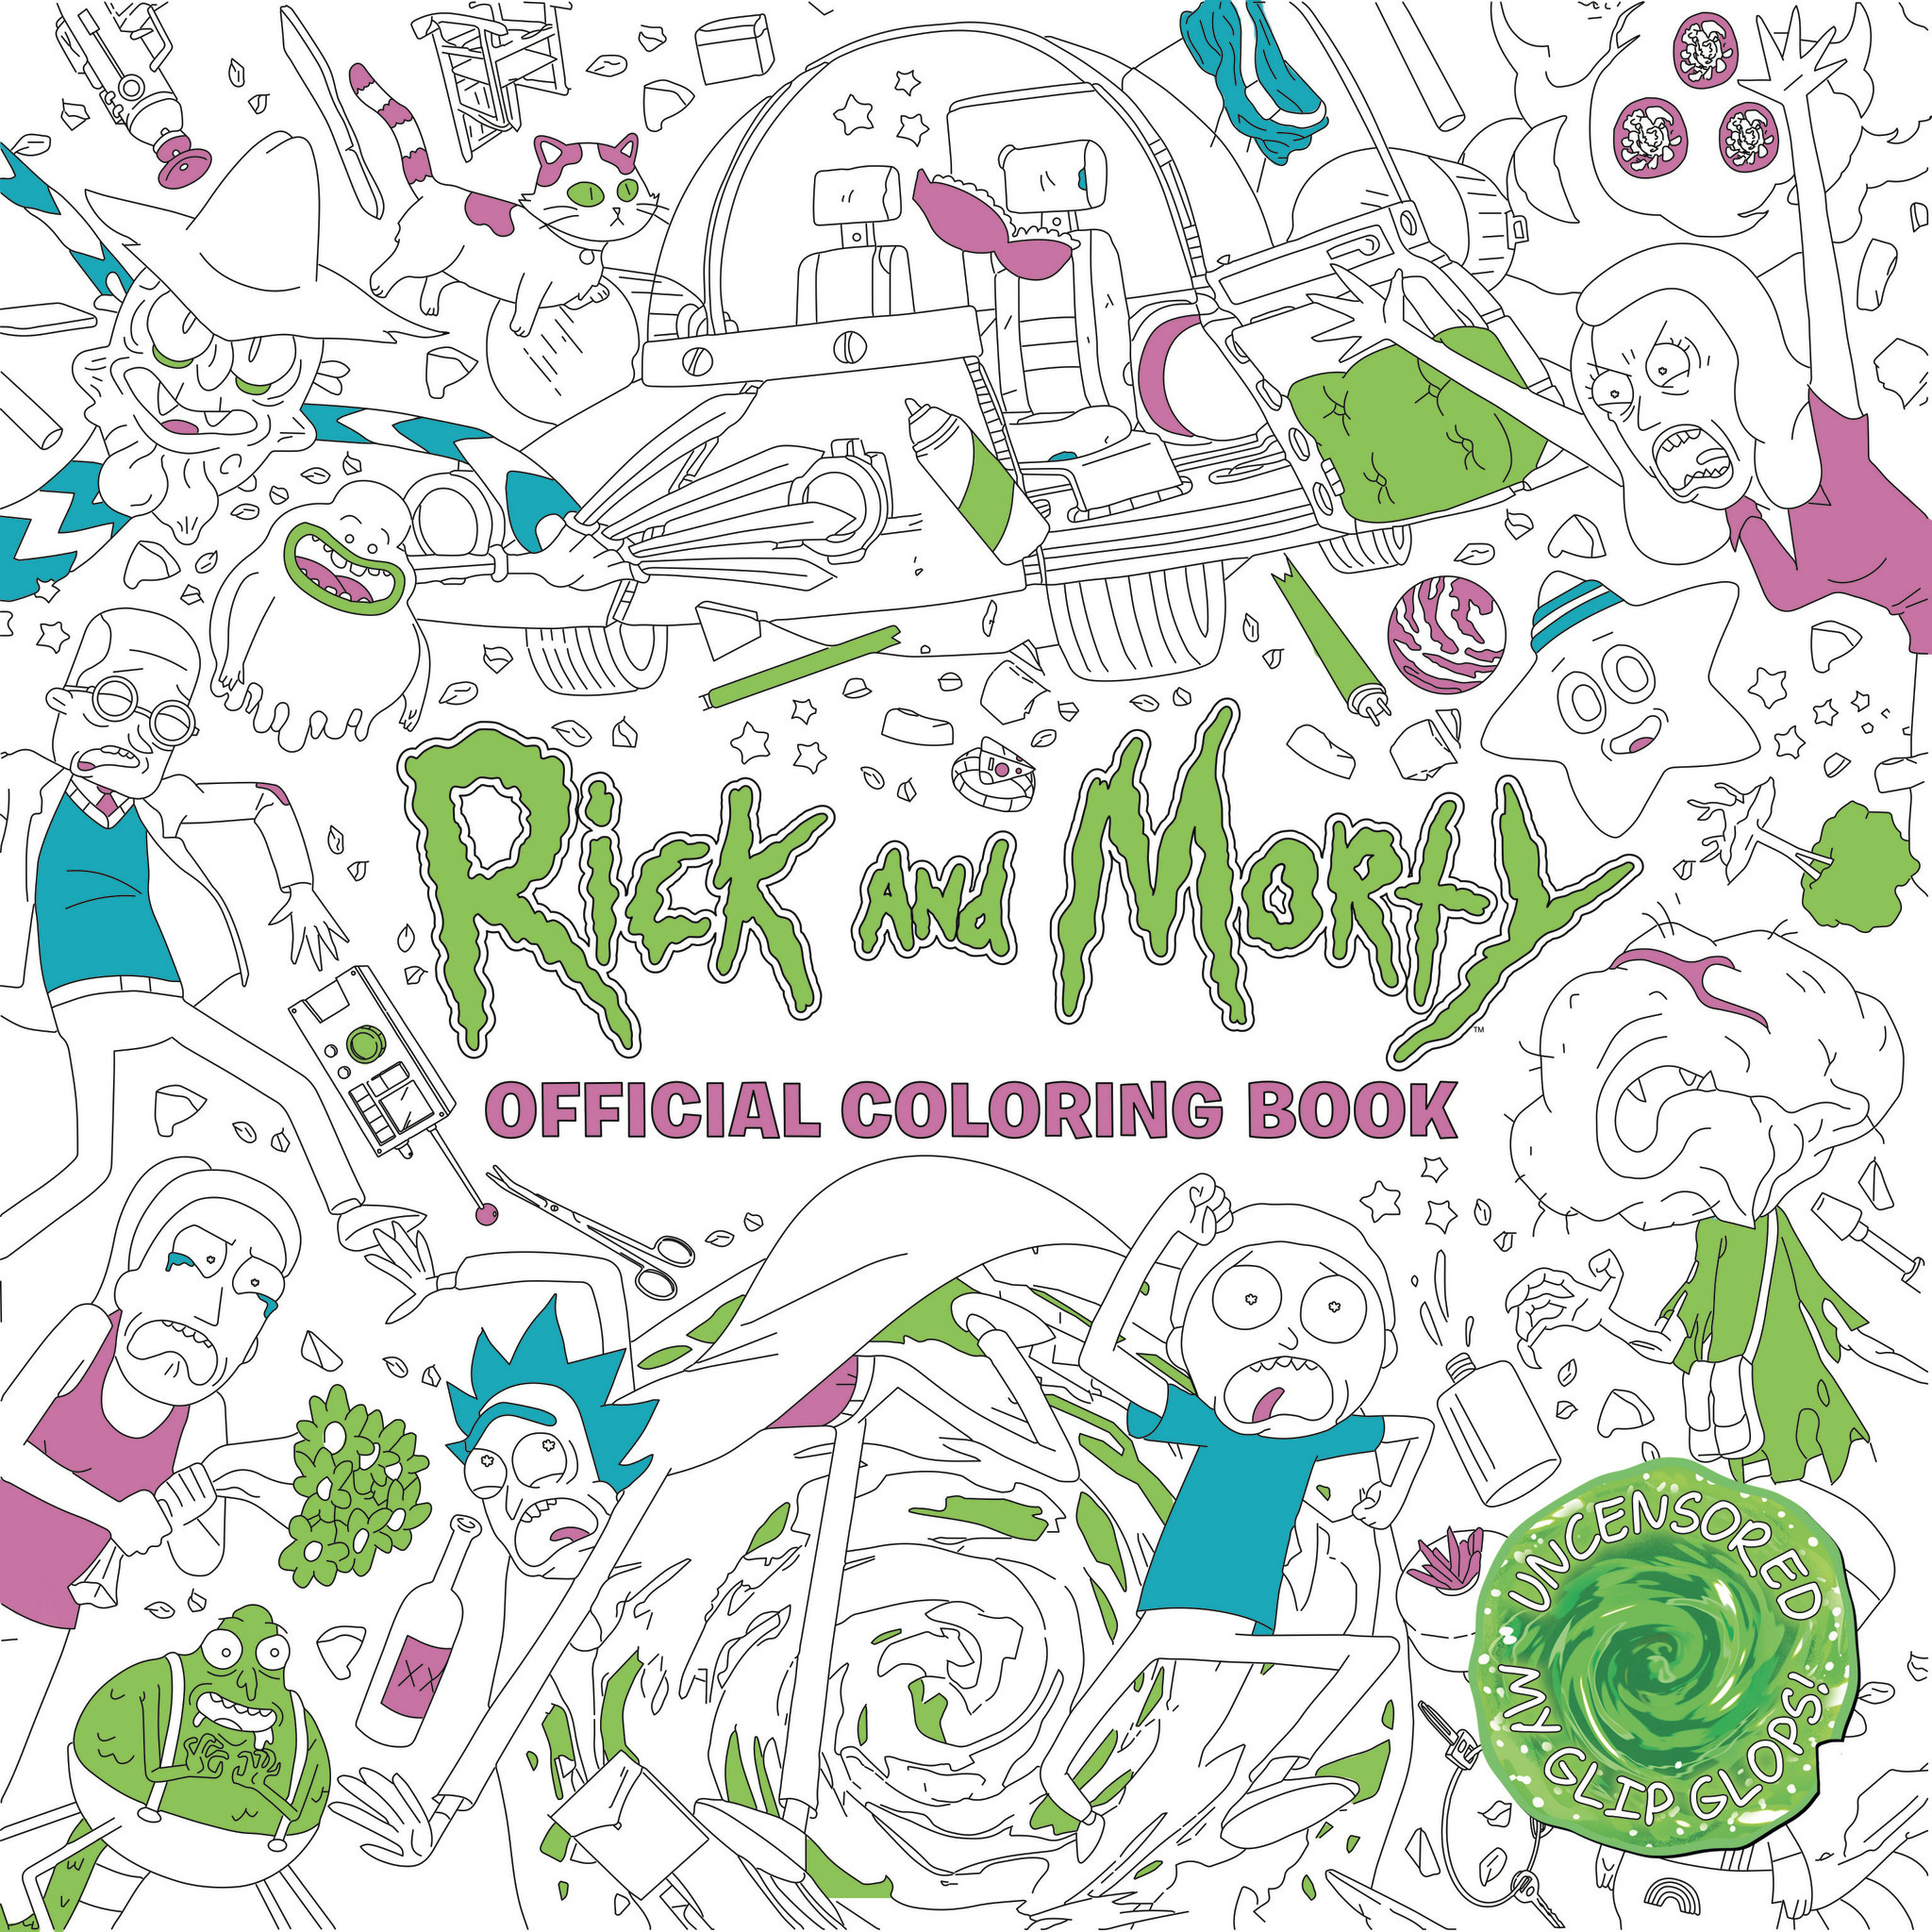 Rick and Morty Rick And Morty Official Coloring Book